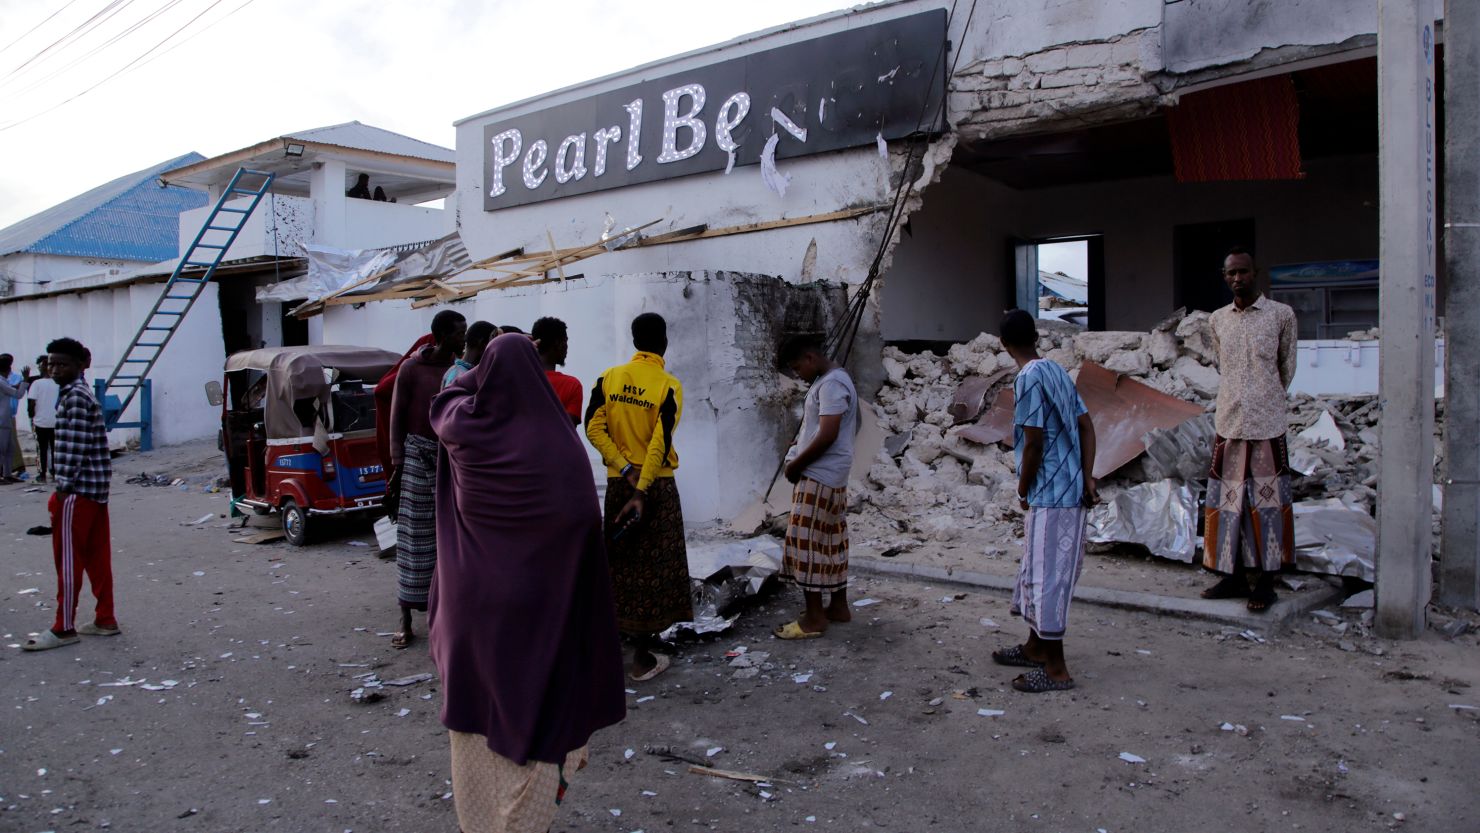 Somalis stand outside the Pearl Beach Hotel on Saturday following a deadly attack.